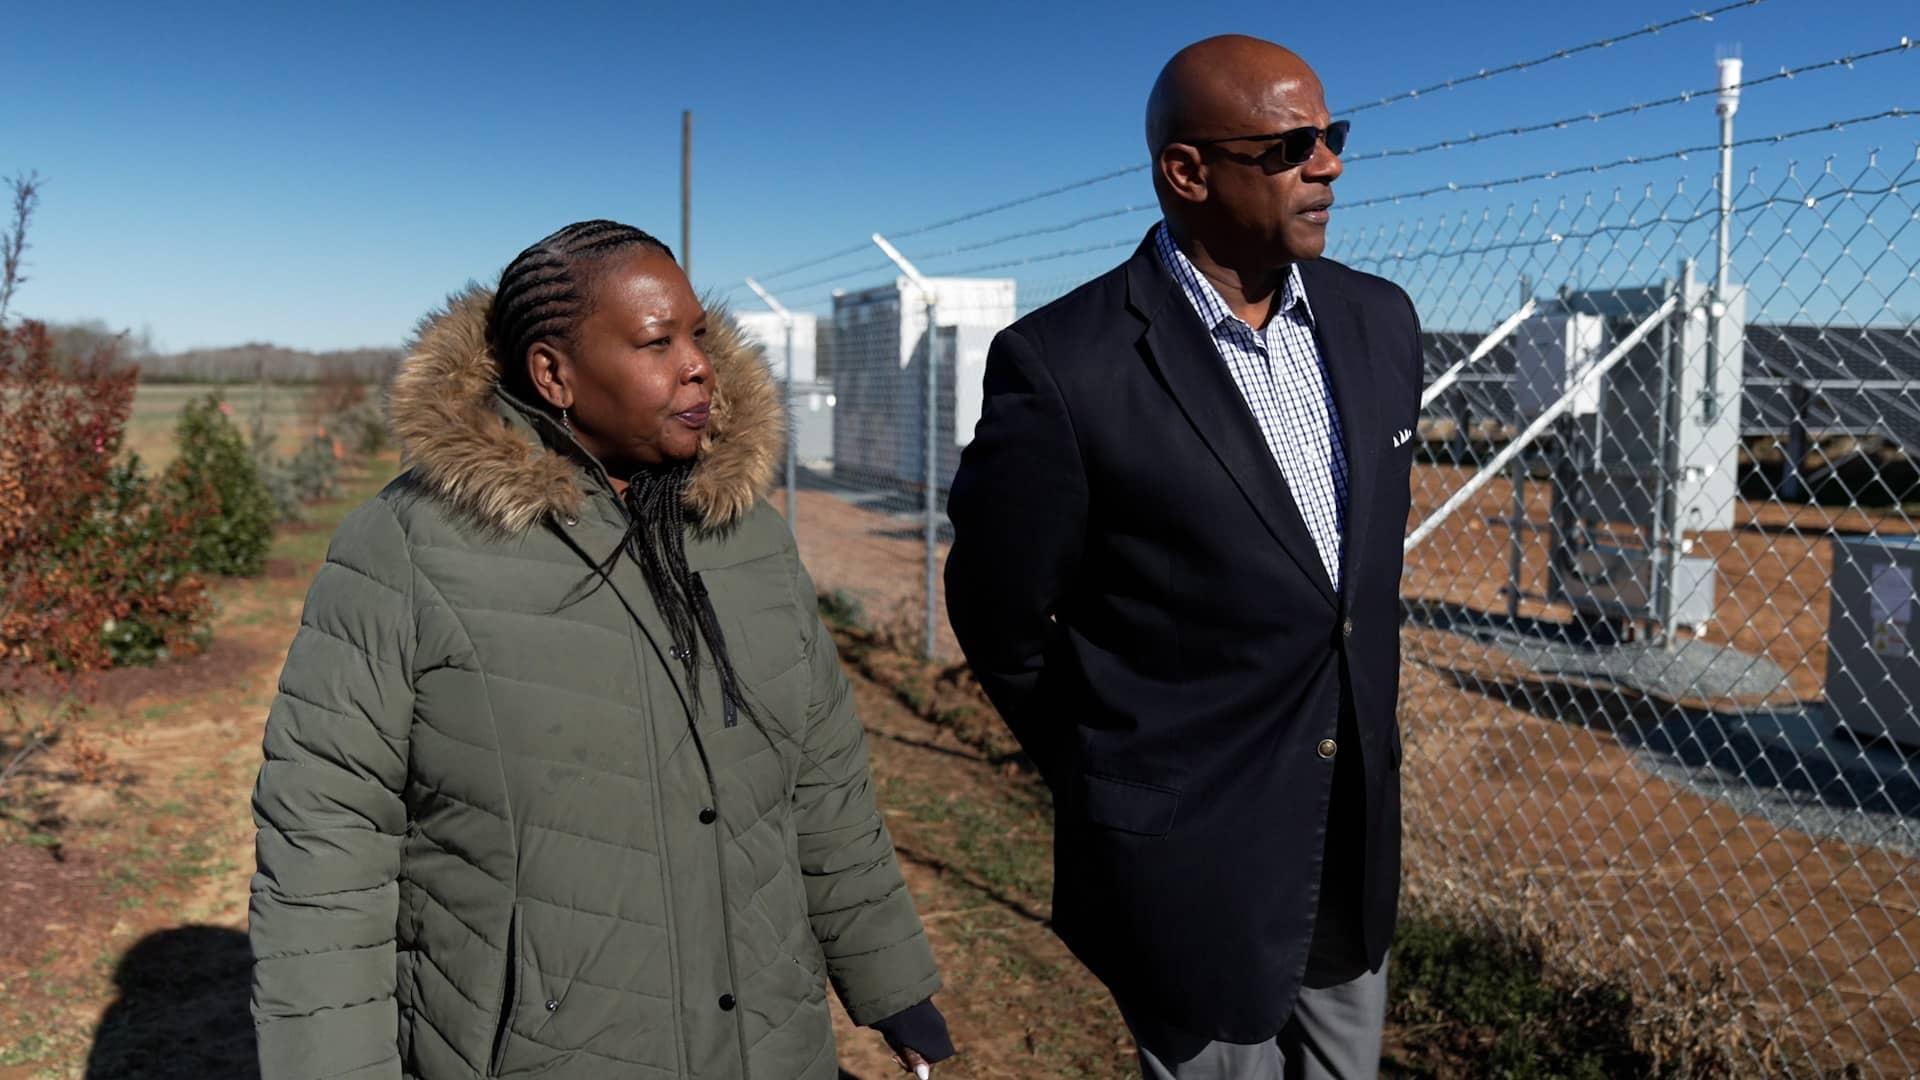 Ajulo Othlow and Marshall Cherry walking on a solar battery farm that's behind a chain-link fence.